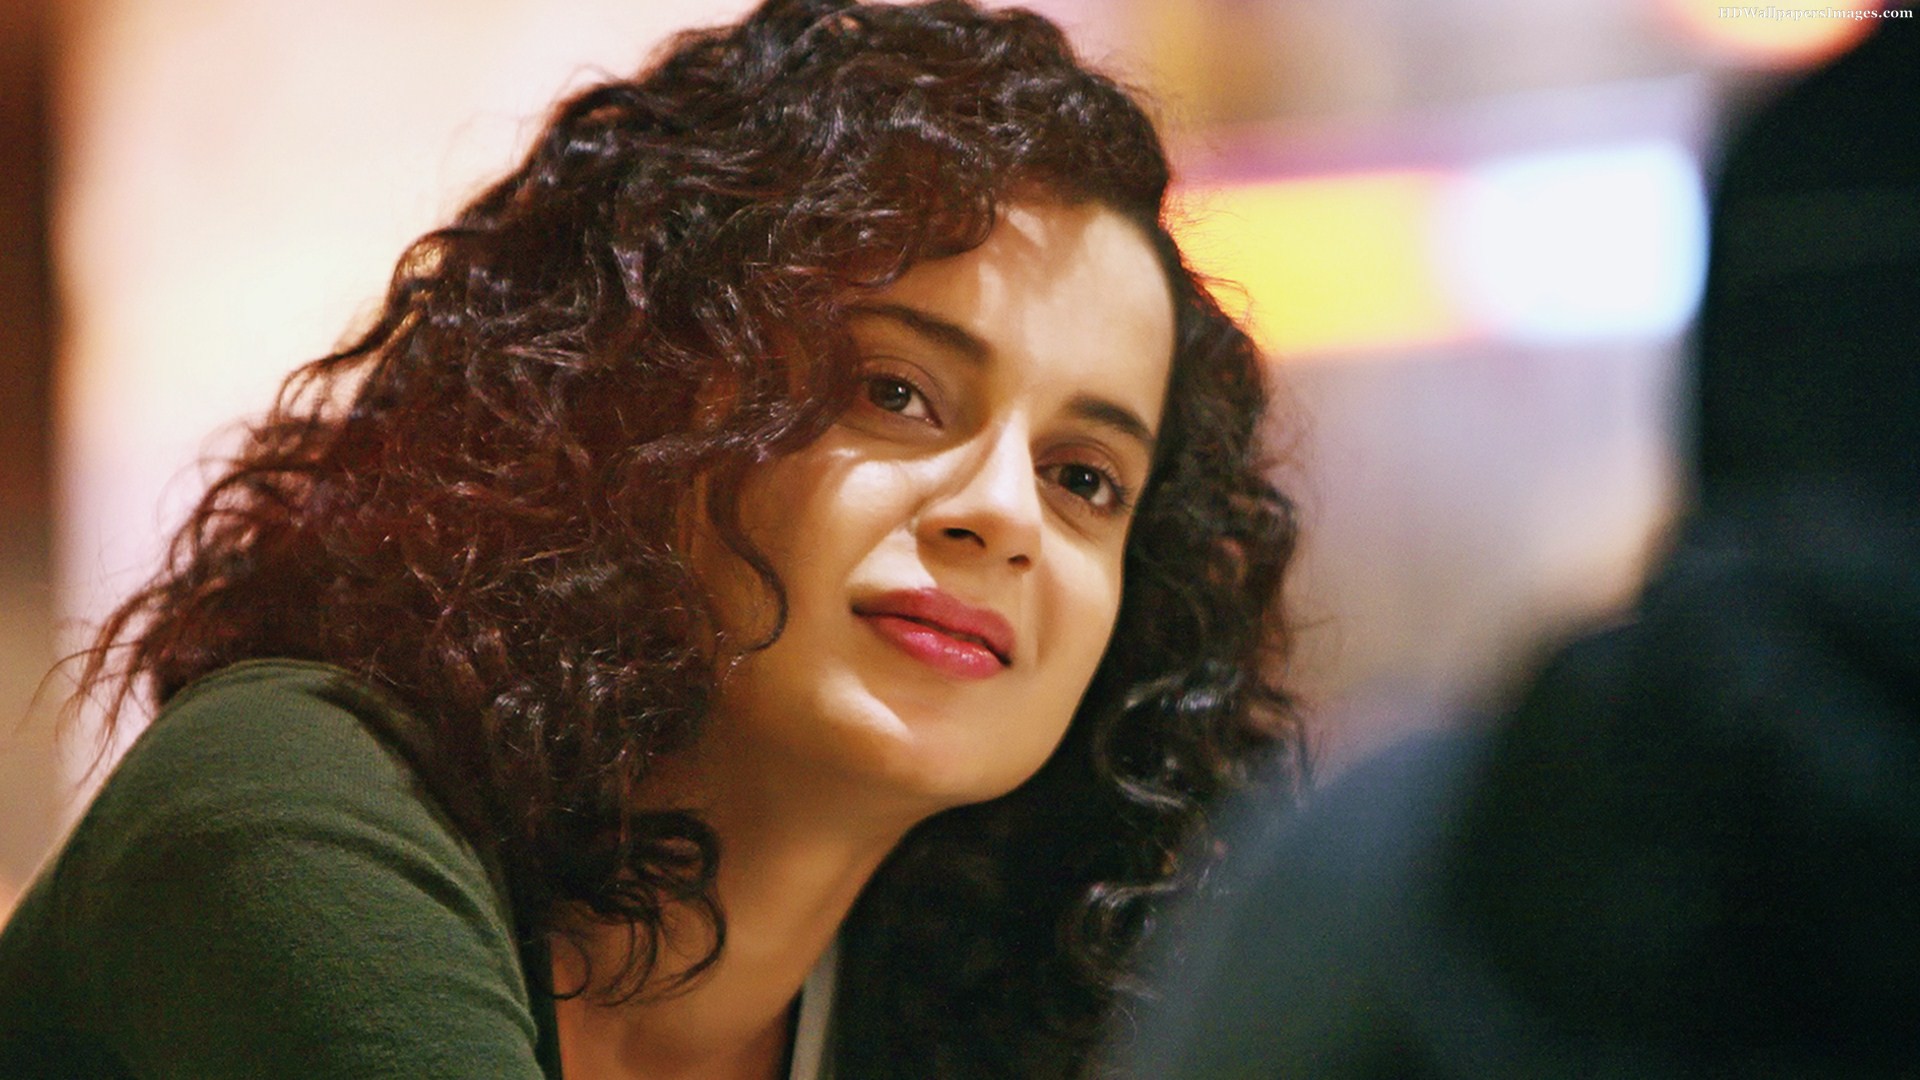 Mental: Kangana Ranaut to reportedly get title rights of her next film from Salman Khan!